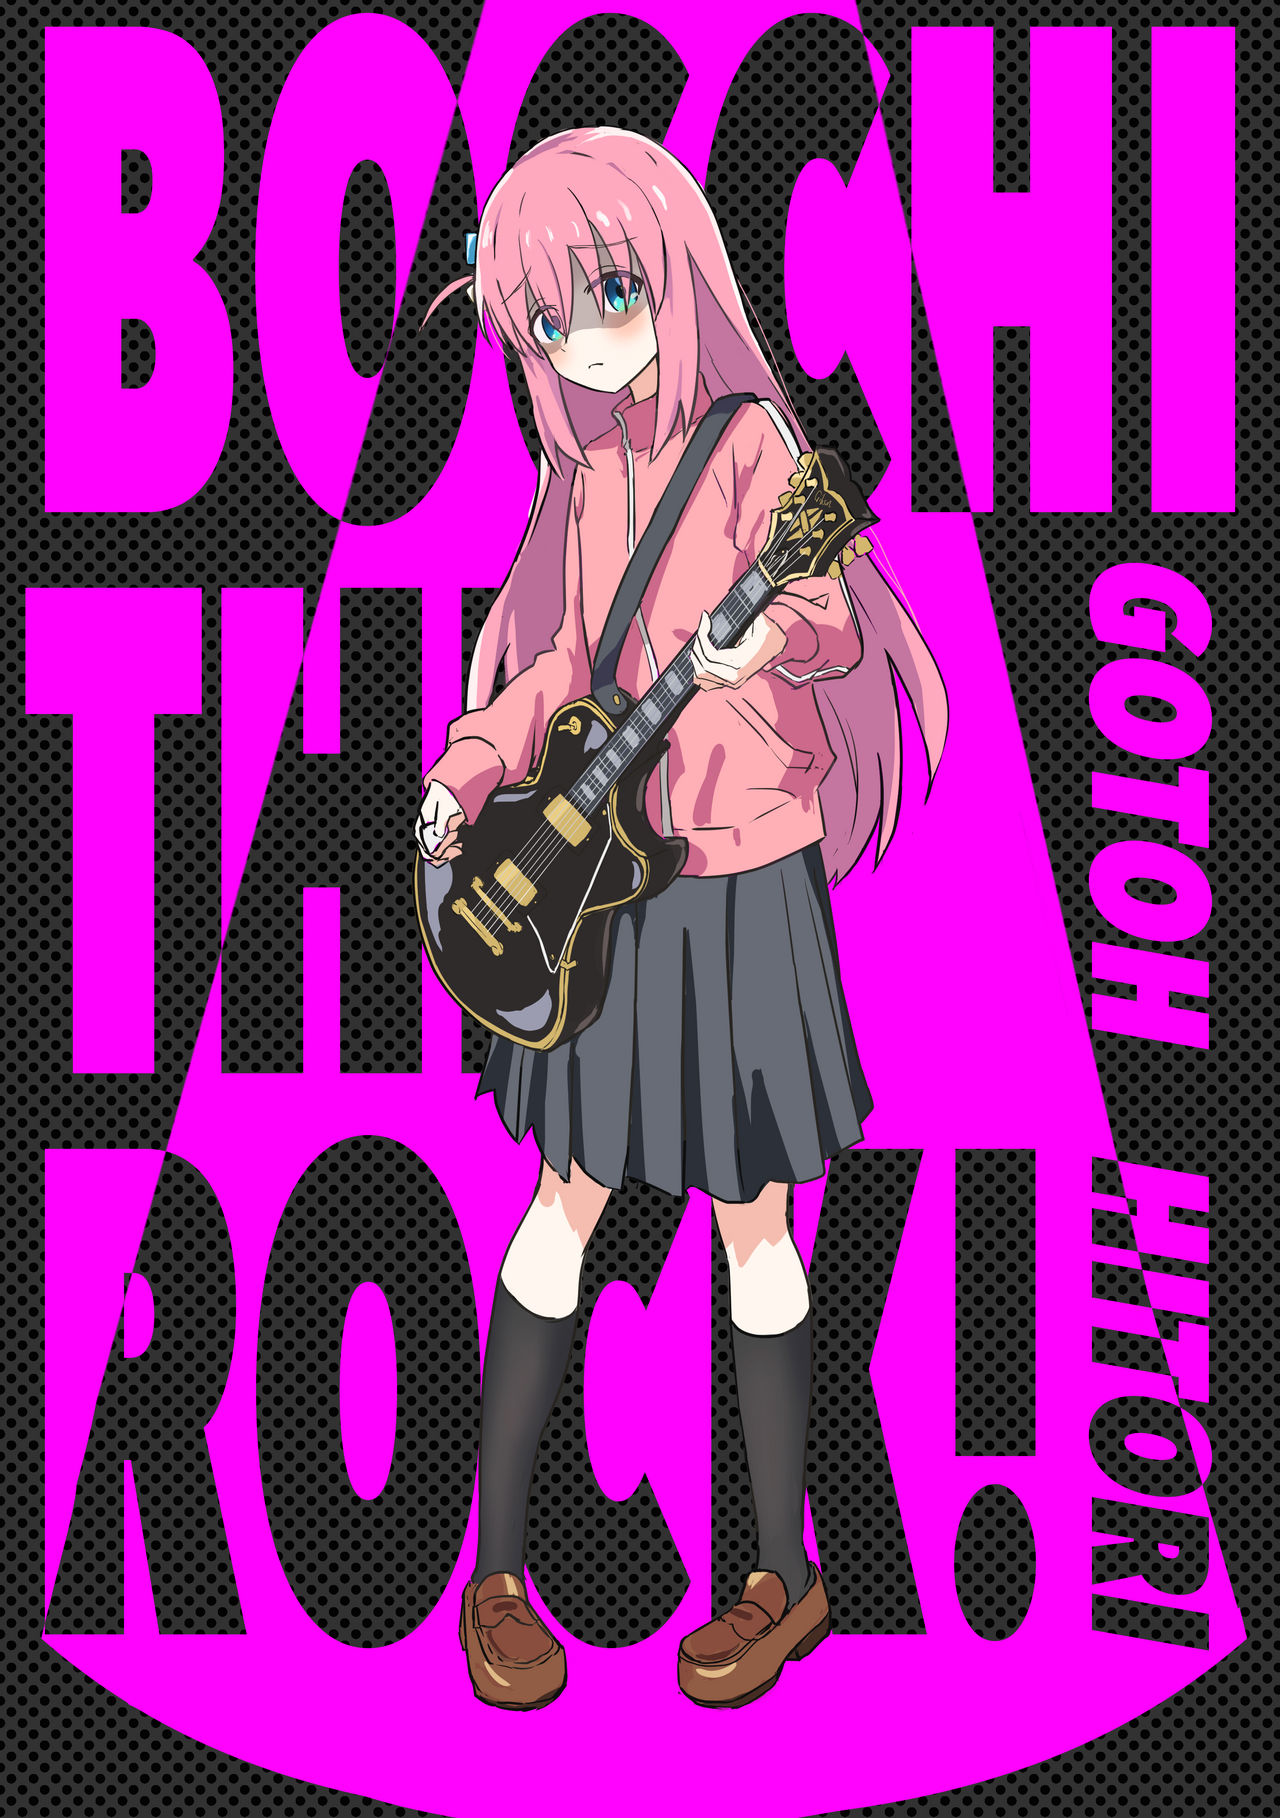 gotoh hitori and the rock (bocchi the rock! and 1 more) drawn by subakeye